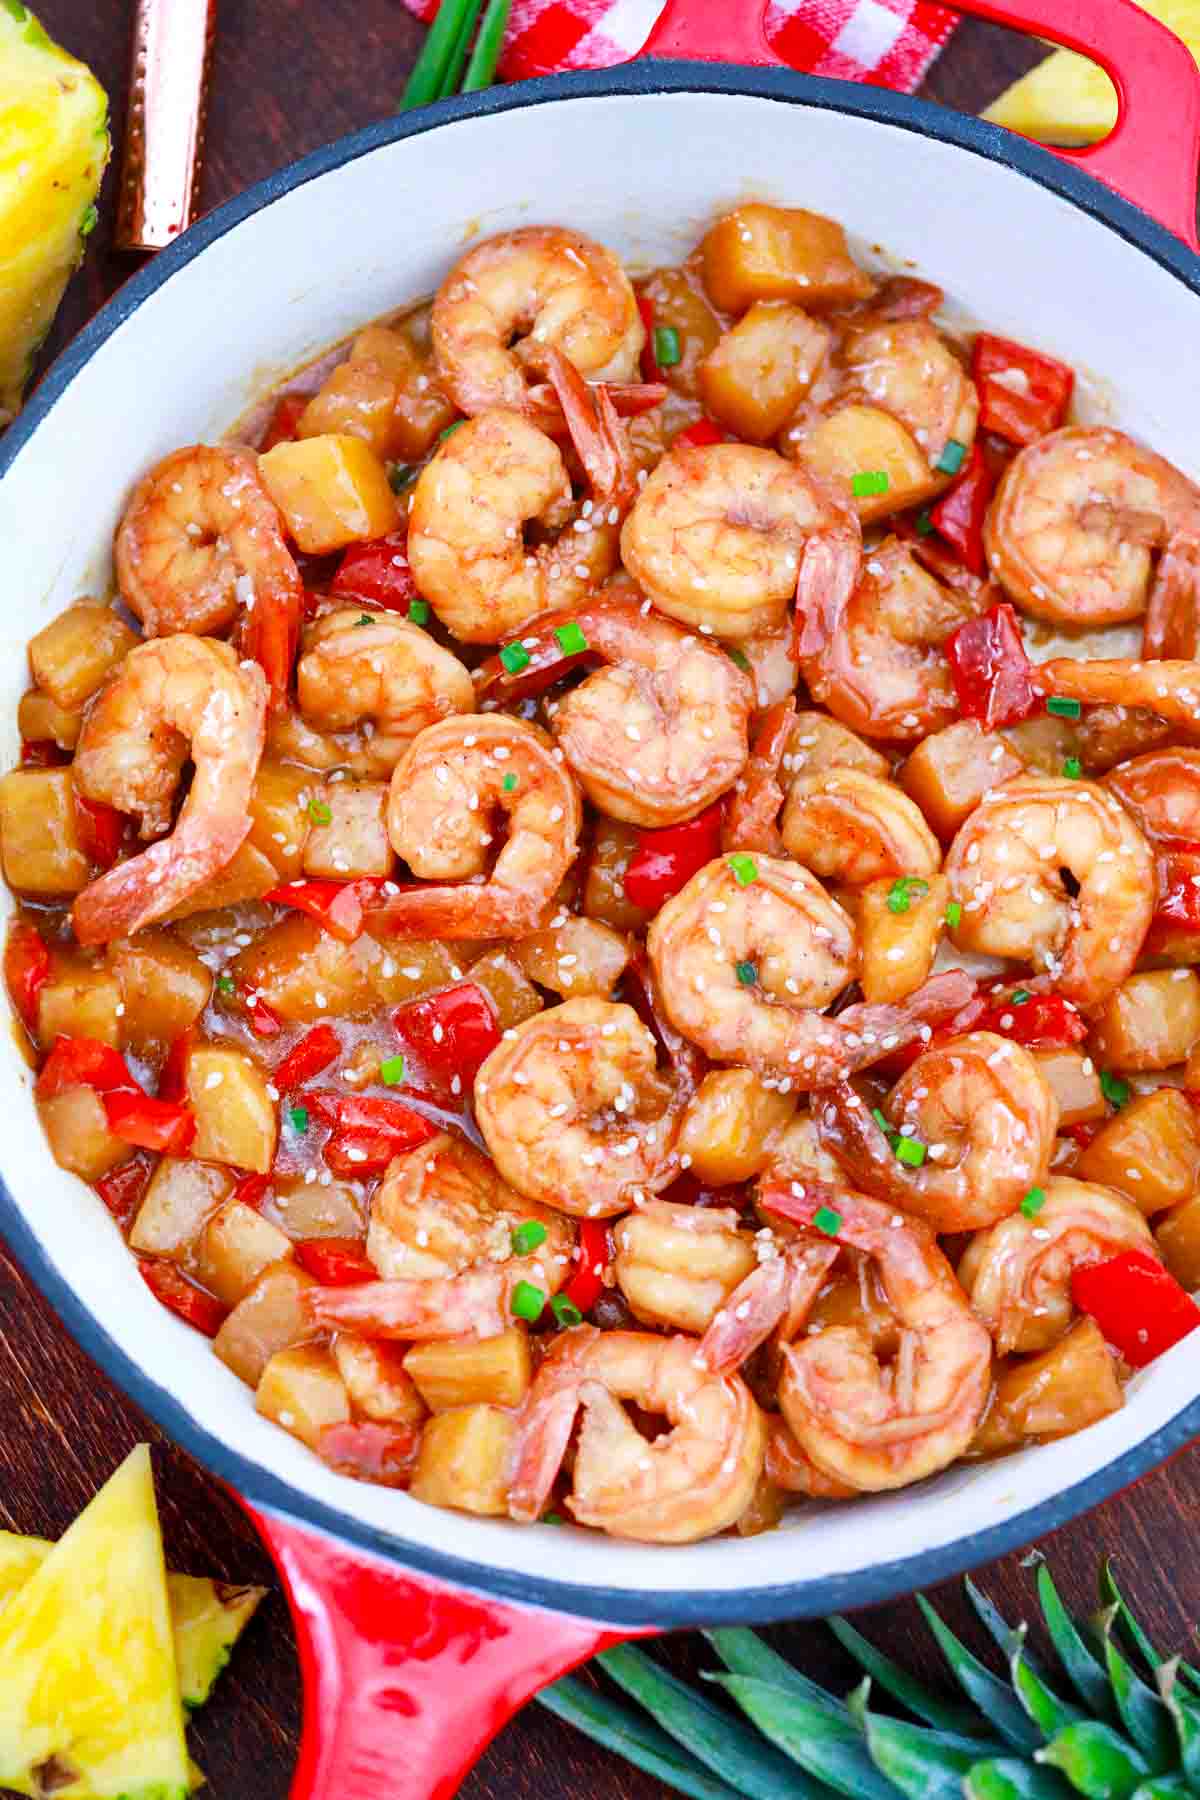 Shrimp, Pineapple, and Bacon in a Cast Iron Skillet